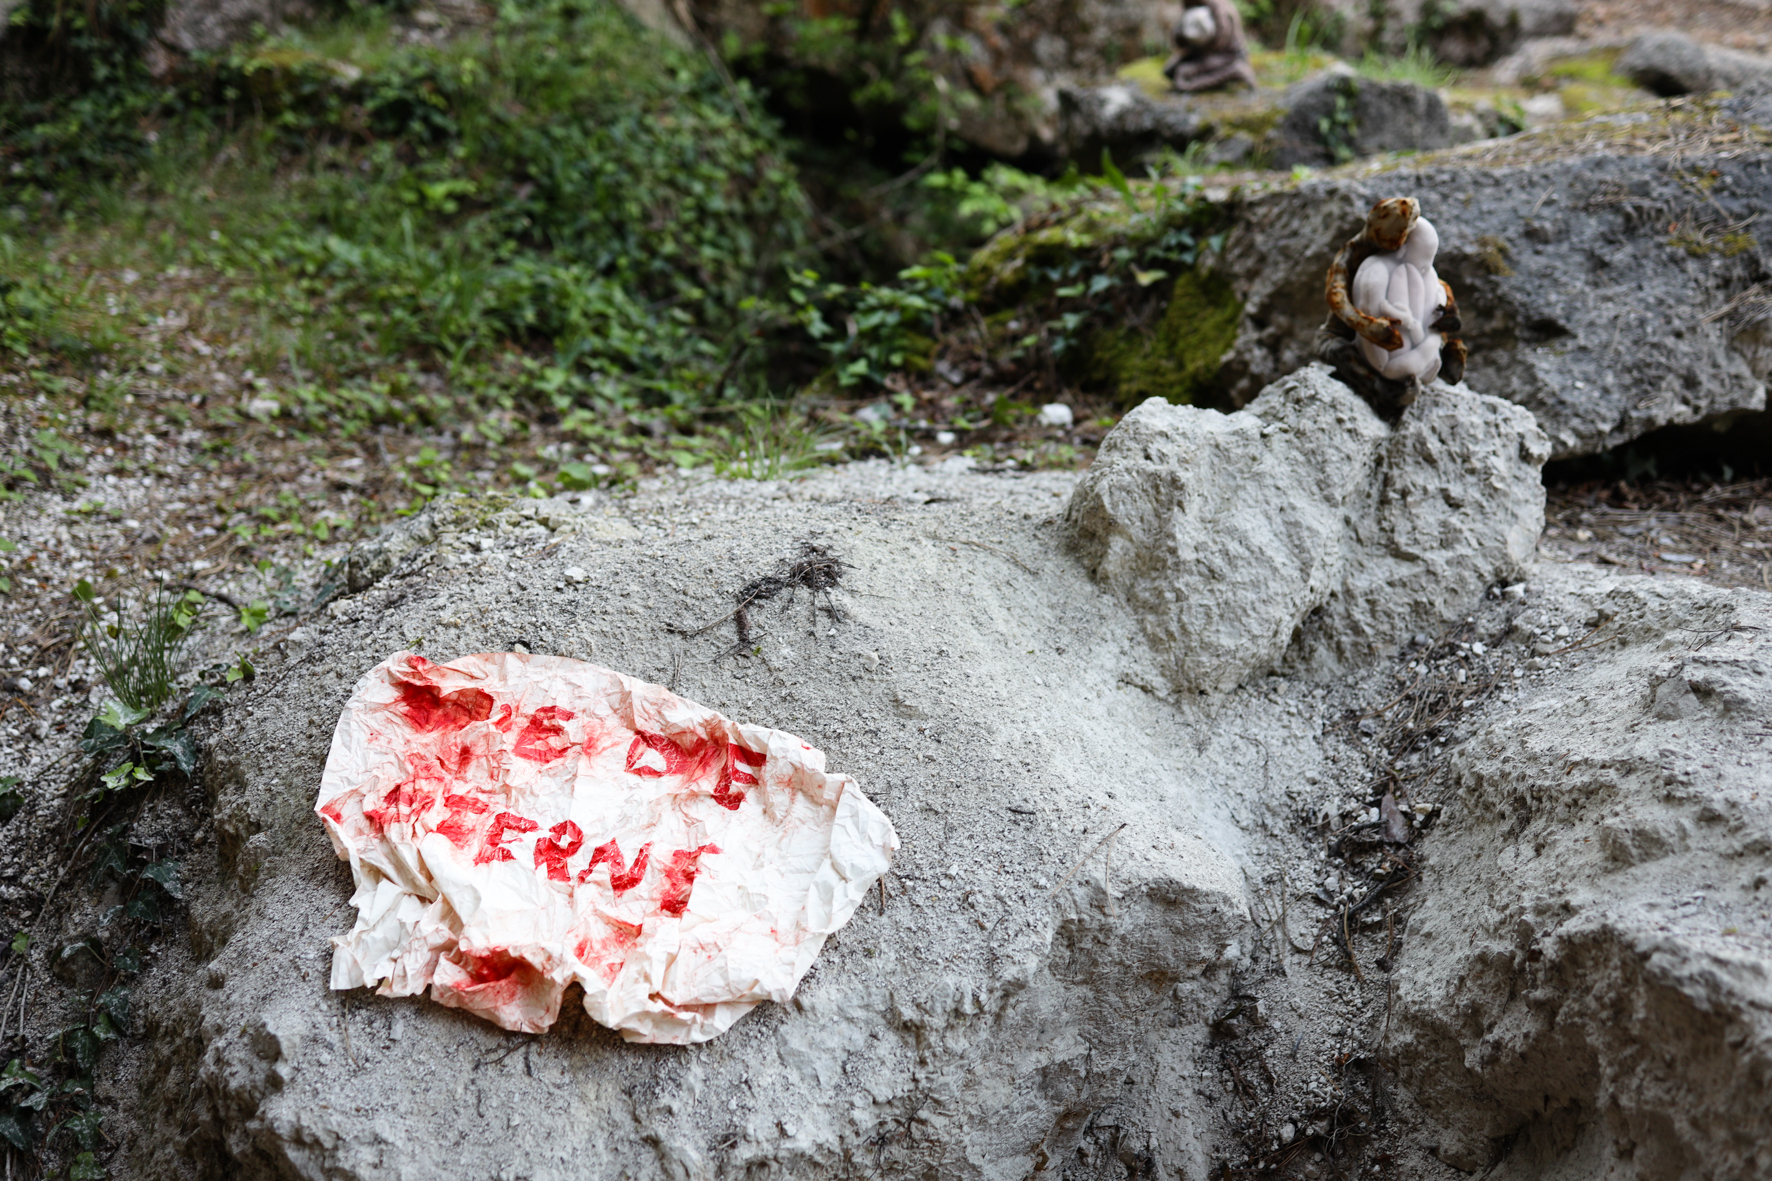 Valerie Habsburg, so lange wie die Sterne, 2022 Paper, ink, 40 x 50 cm and Dominik Styk, no title, 2021, mixed media, dimensions variable, installation view outside of the cave